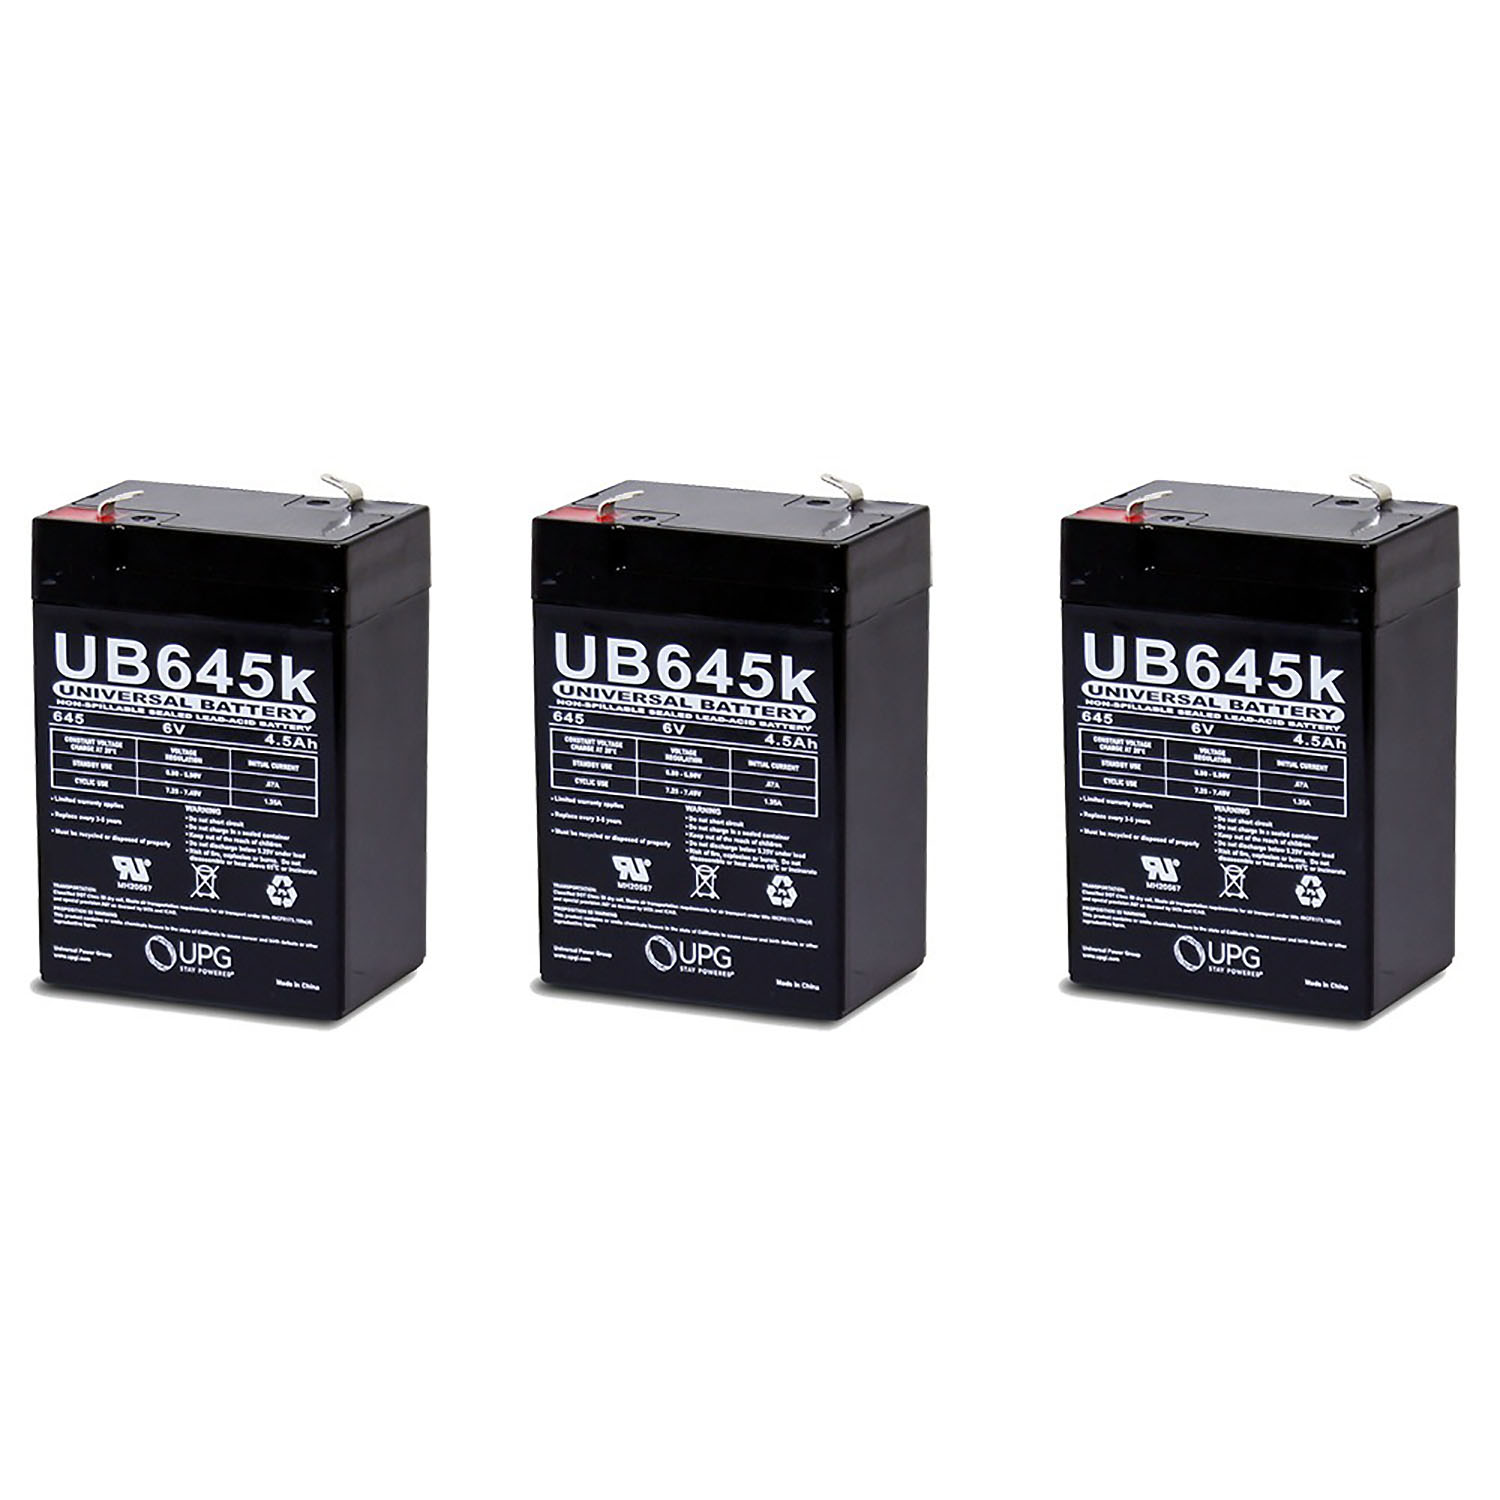 6V 4.5Ah SLA Replacement Battery Compatible with Streamlight Vulcan, 44007, Sho-me - 3 Pack